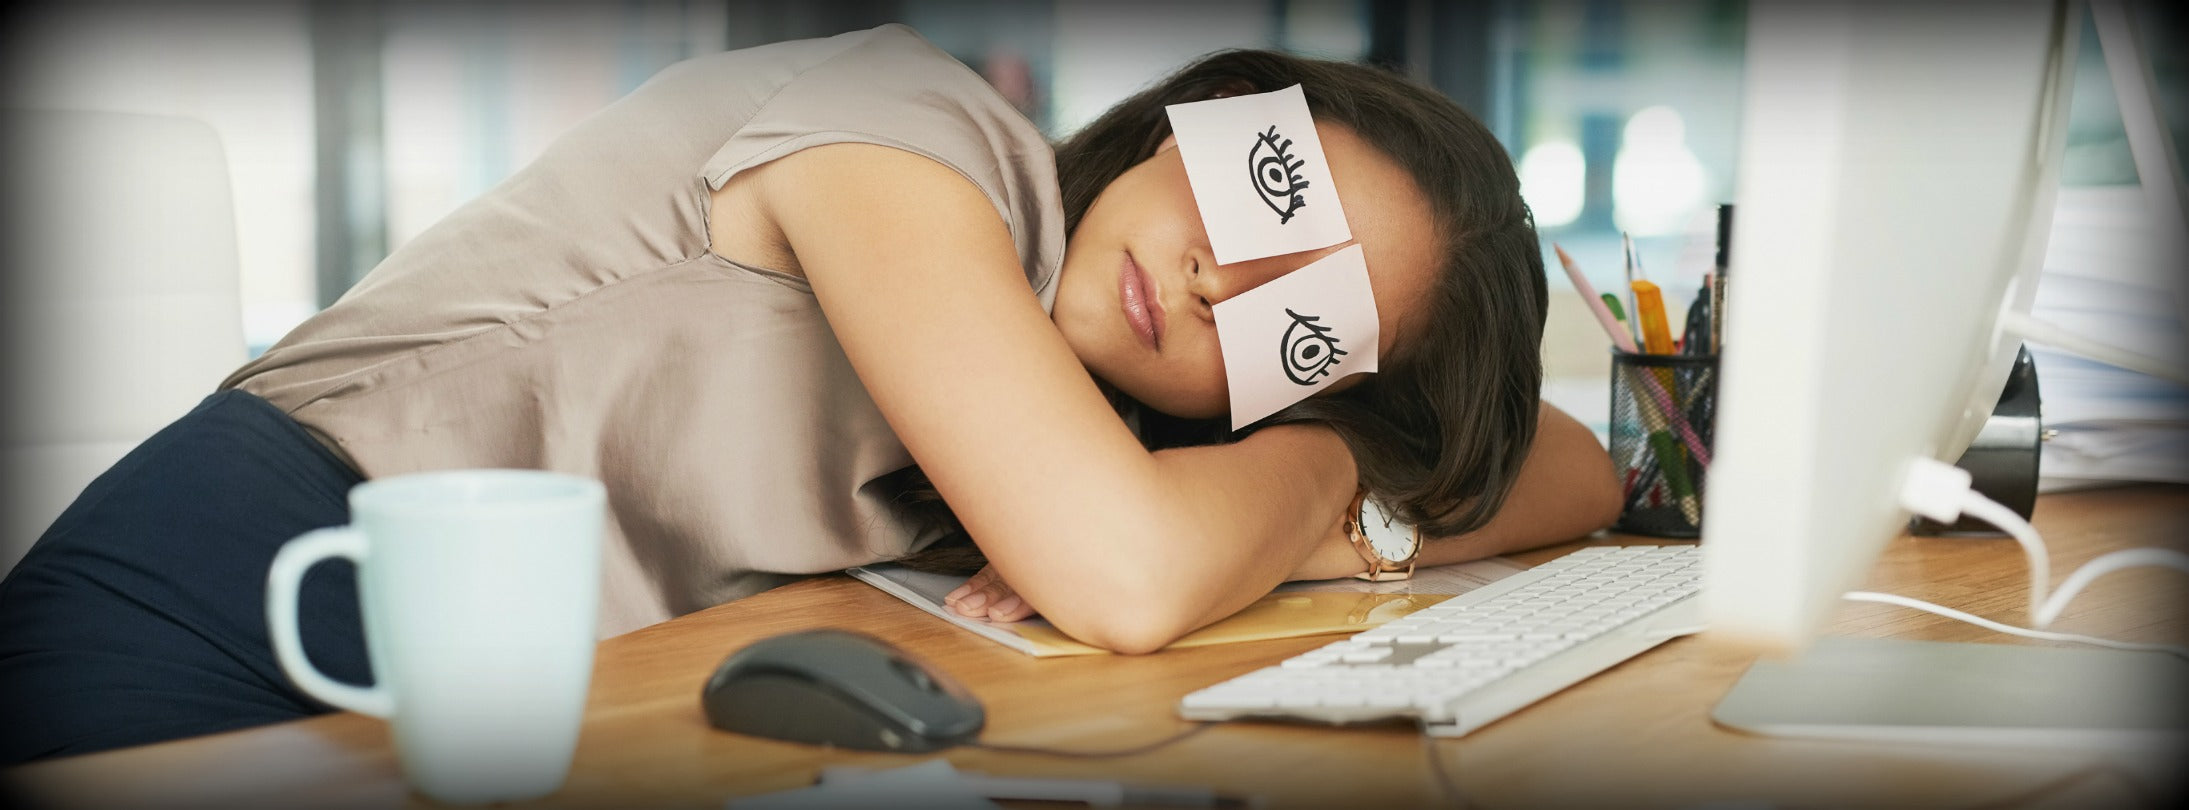 8 Savvy Ways to Supercharge Your Power Nap